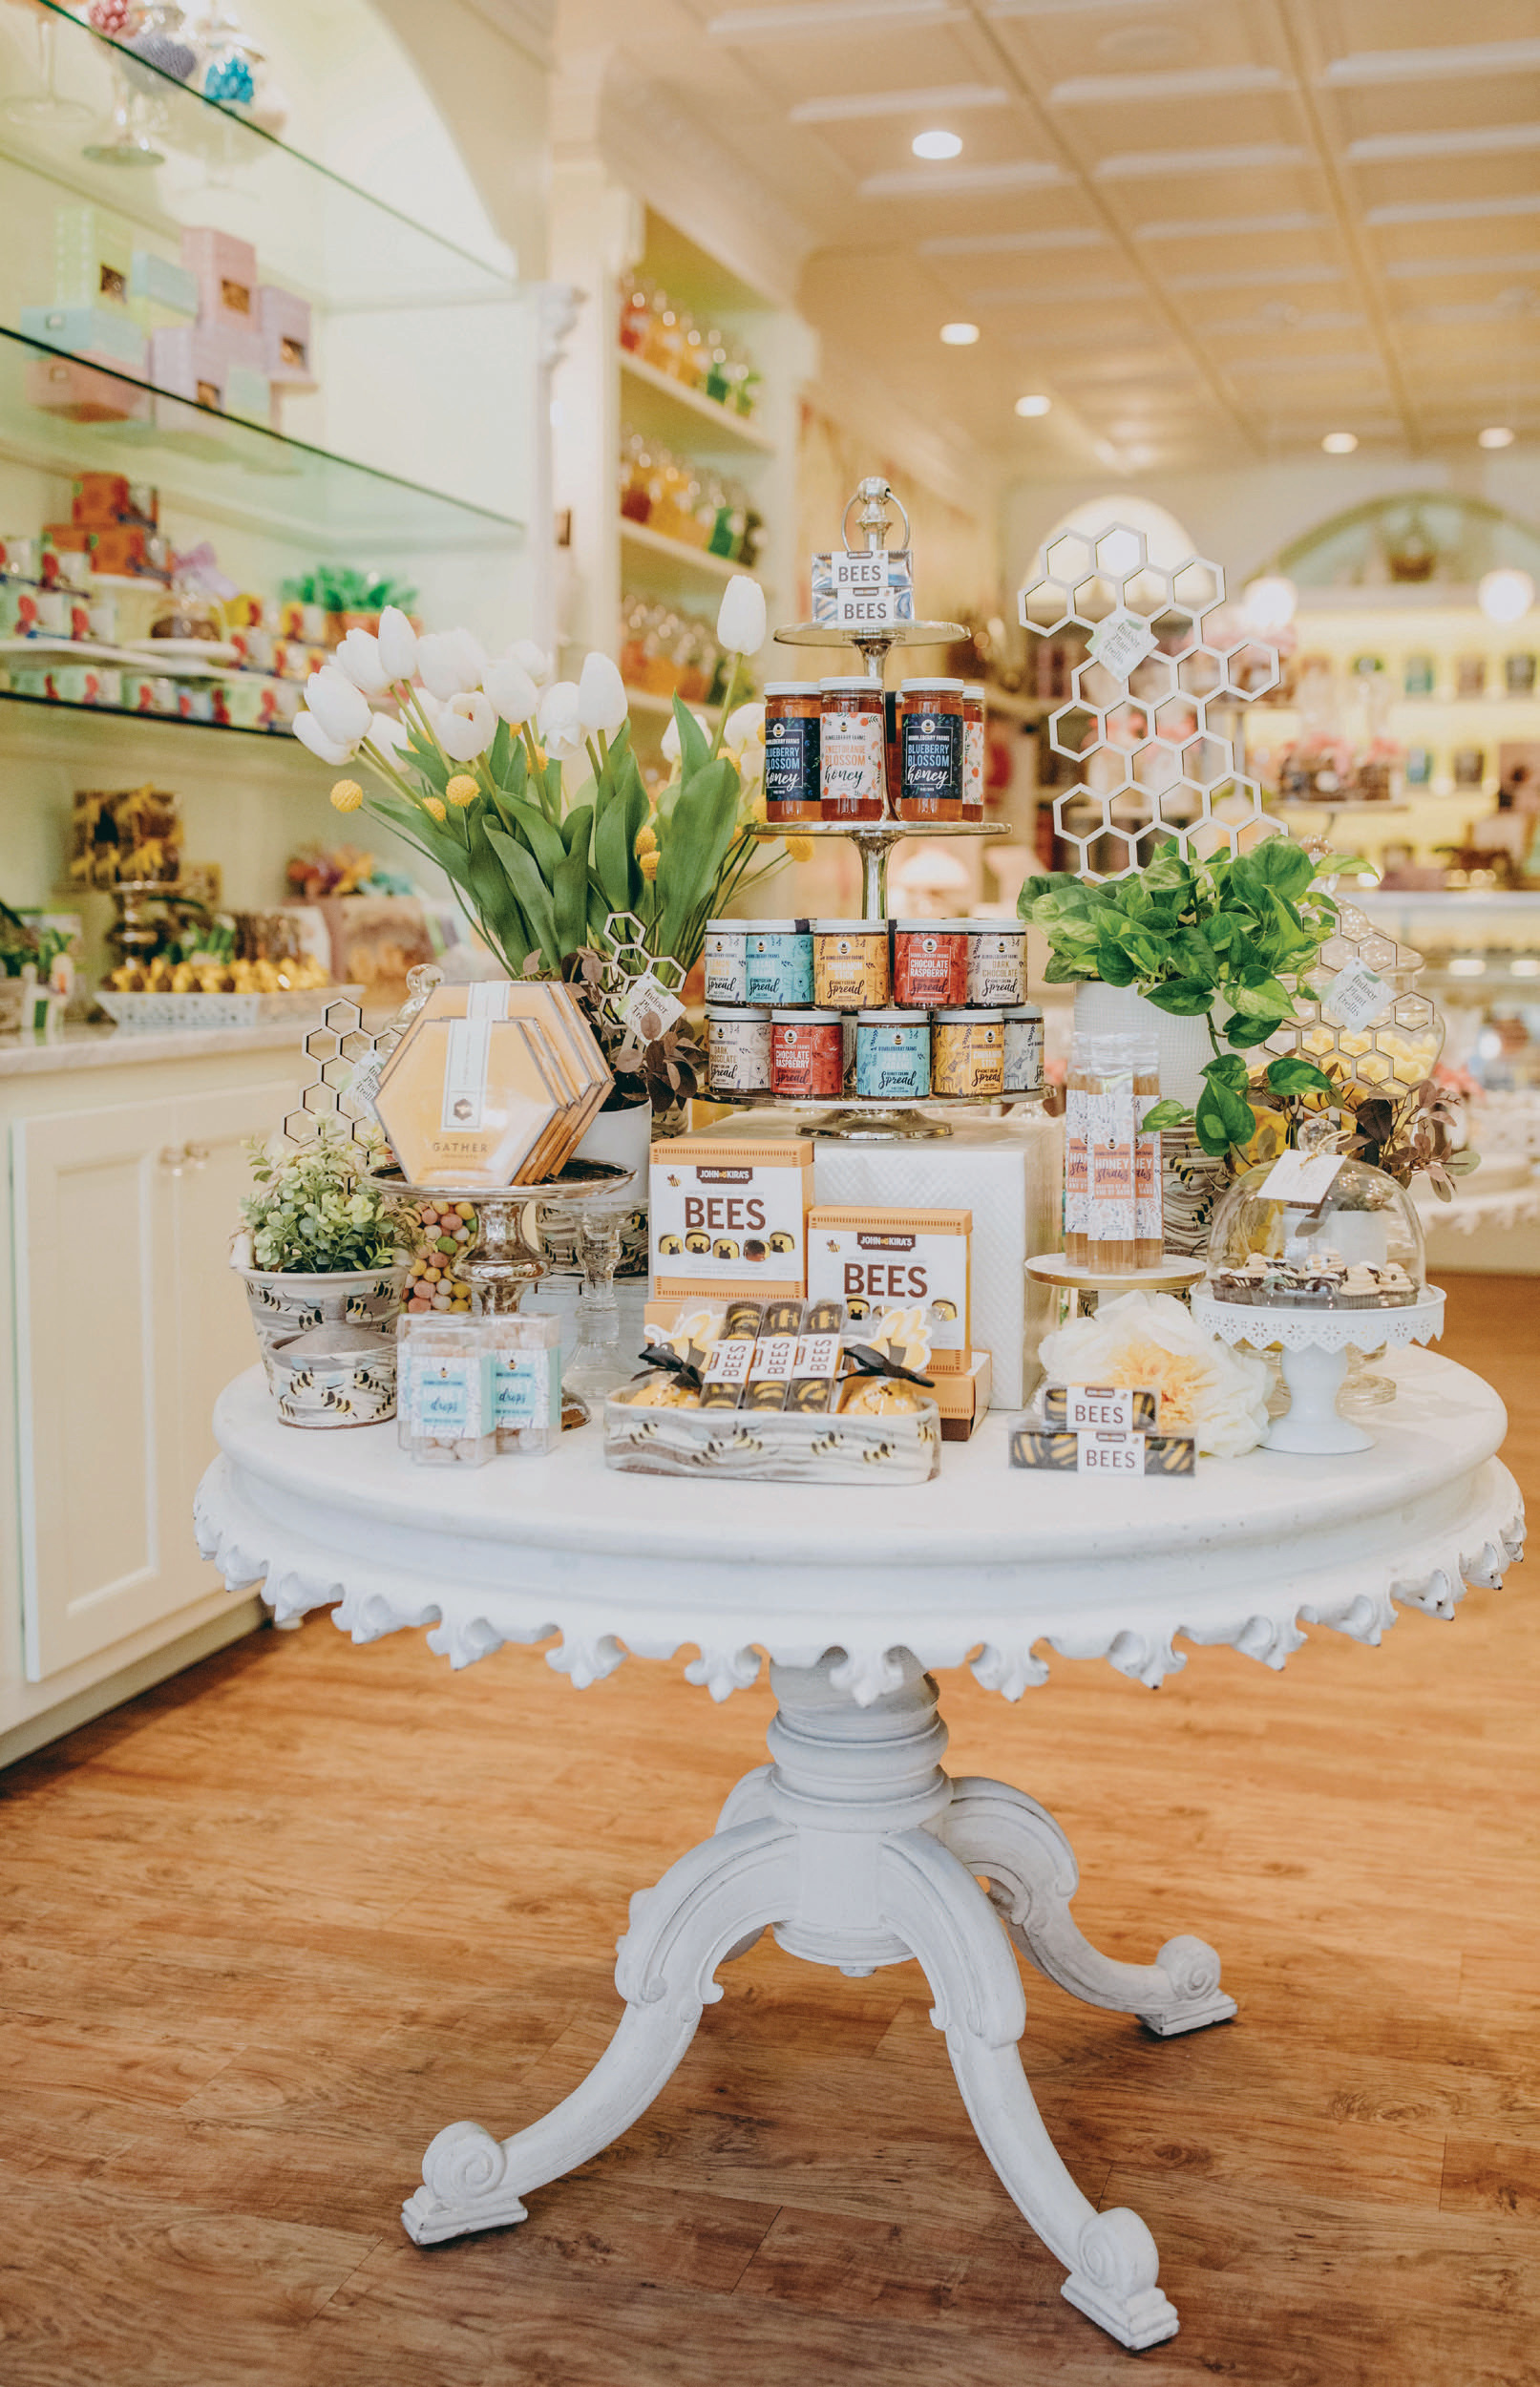 Arranged like an apothecary of confections, Edie Bees in Lewes provides a magical experience for sugar lovers.